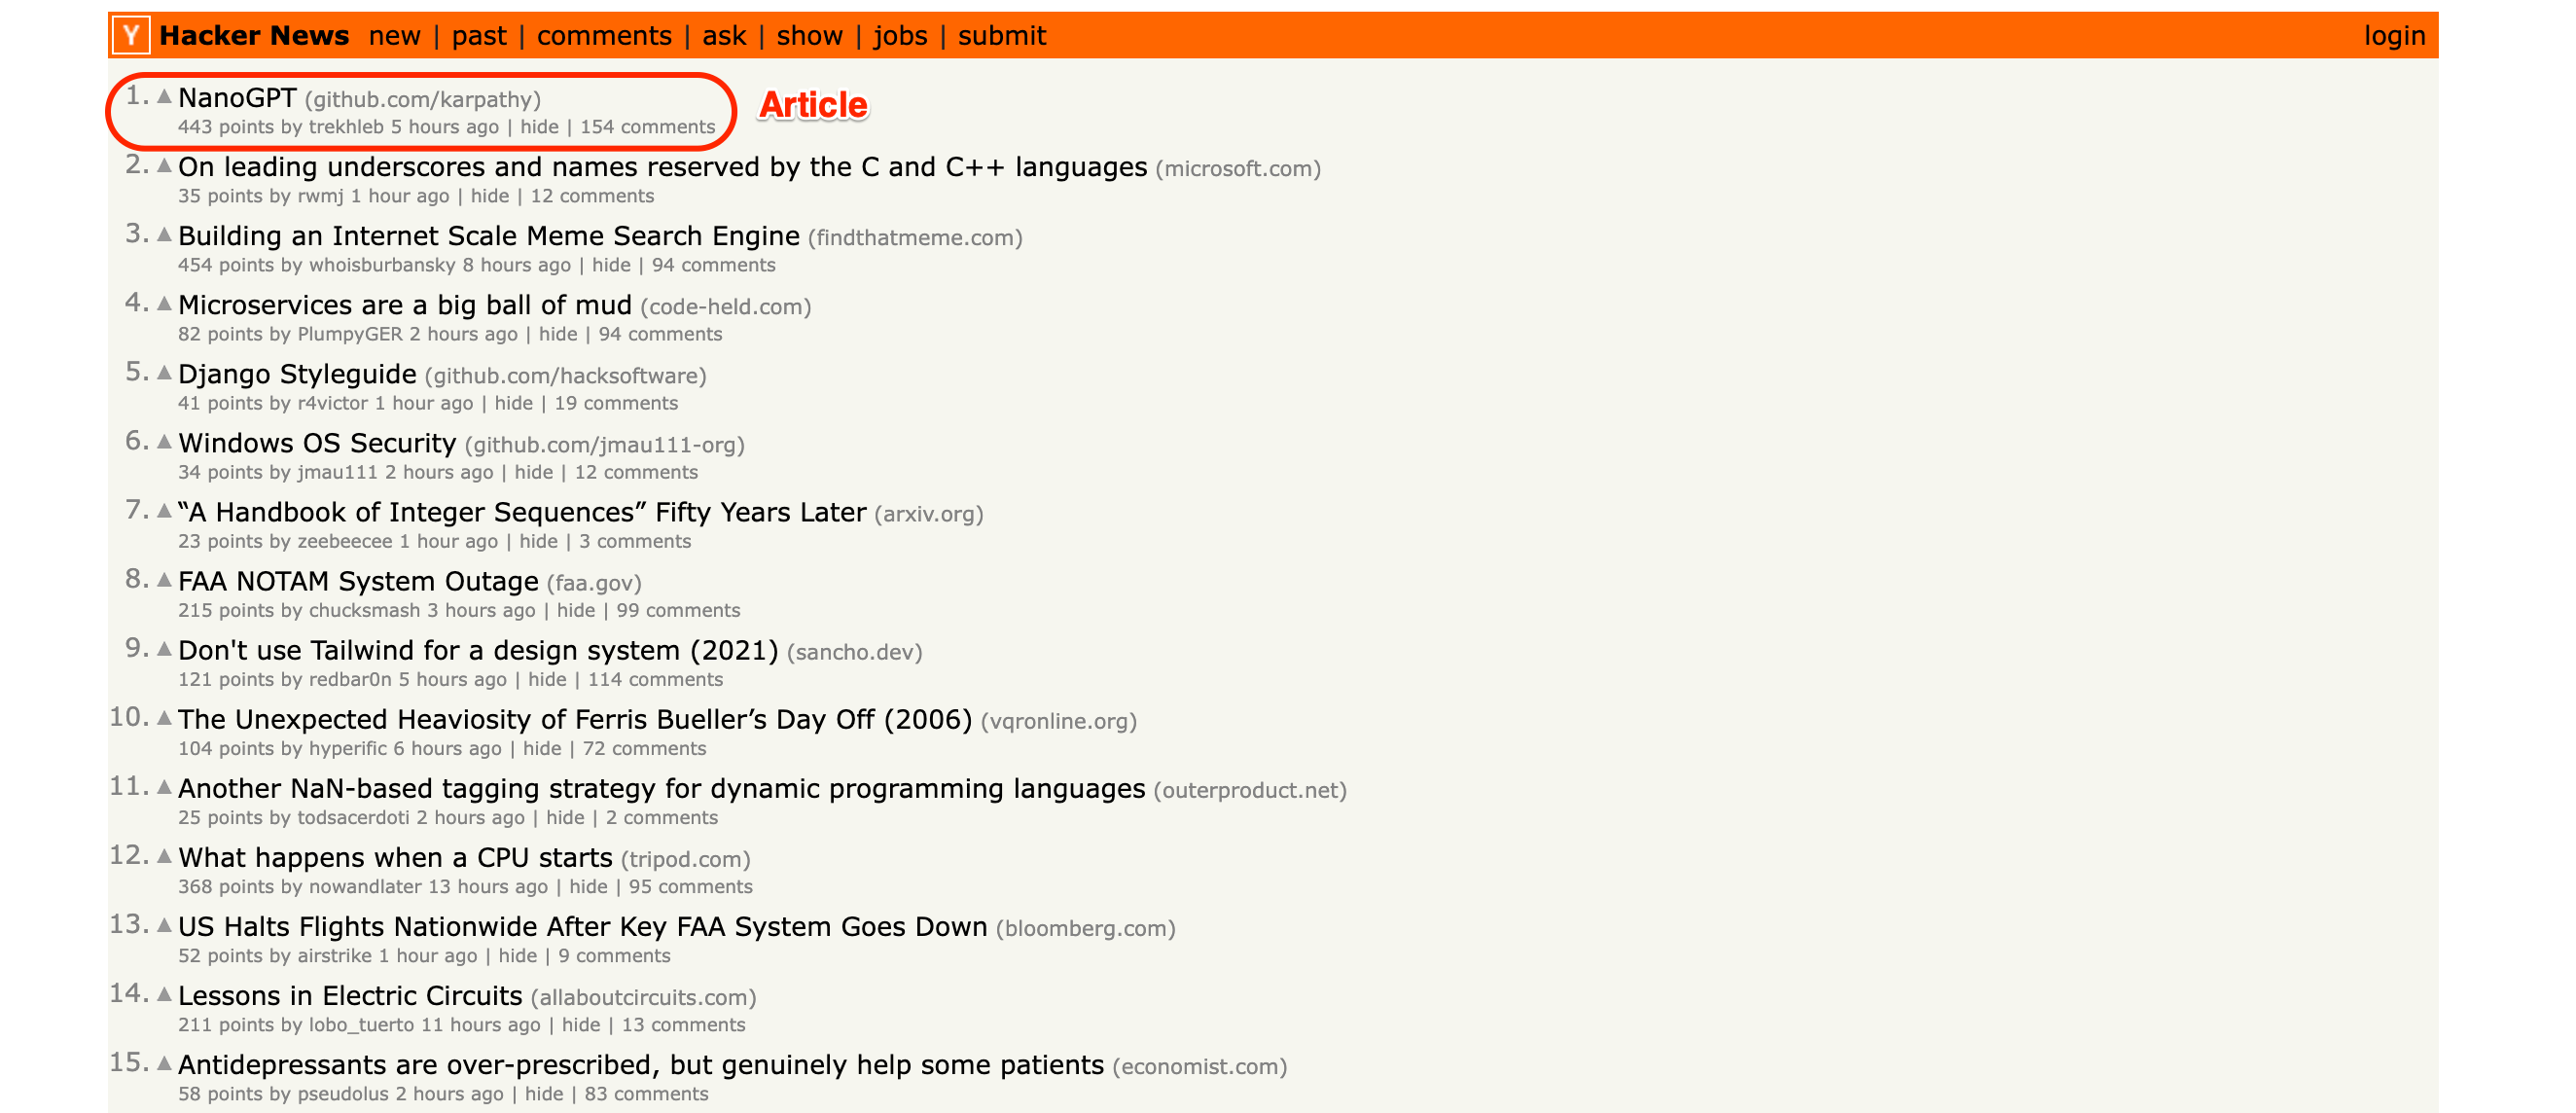 Screenshot of Hacker News front page to accompany article on using Axios, Cheerio and Node.js to scrape data from Hacker News